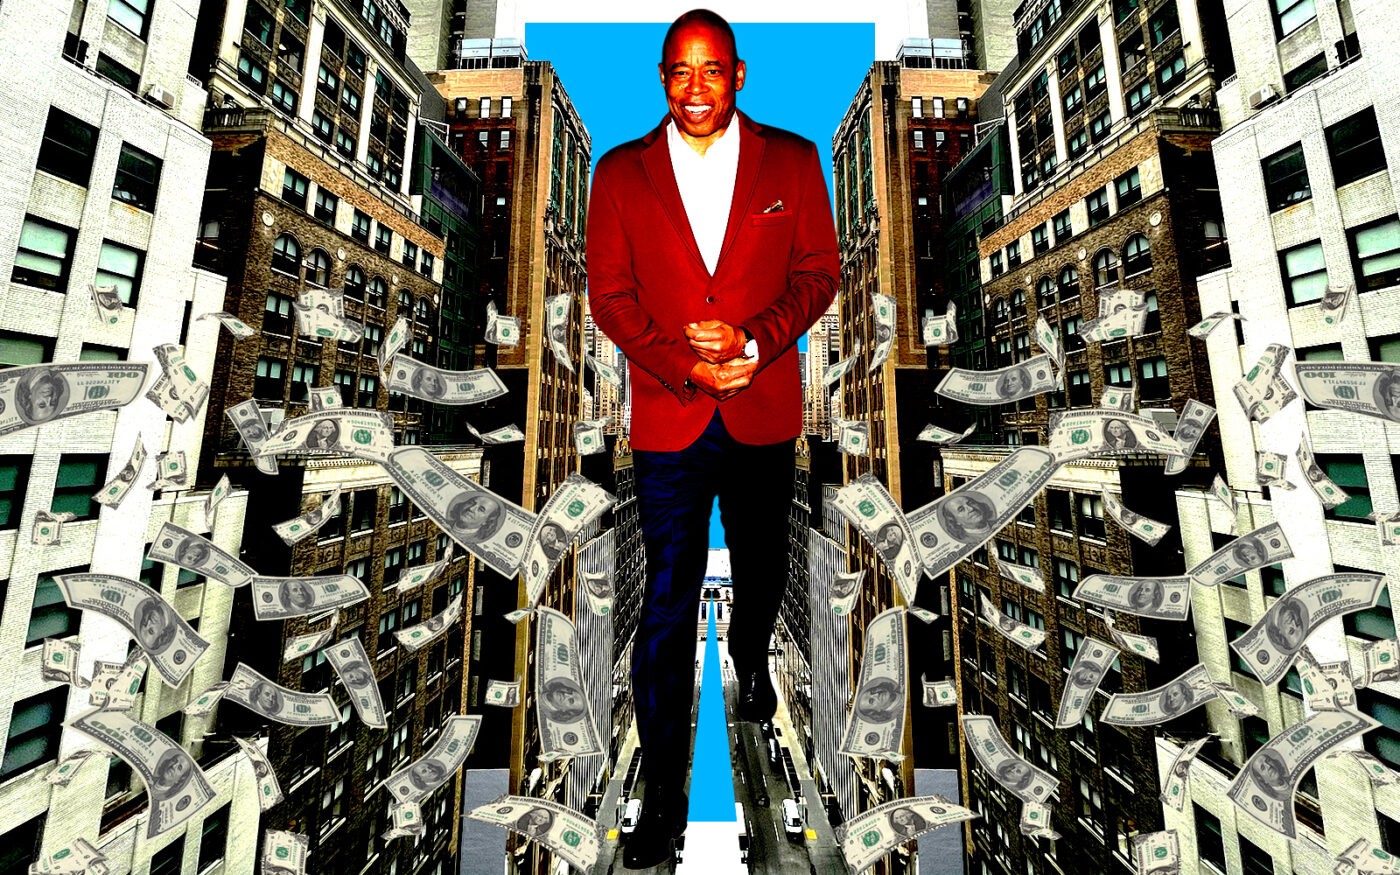 Mayor of New York City Eric Adams (Photo Illustration by Steven Dilakian for The Real Deal with Getty)